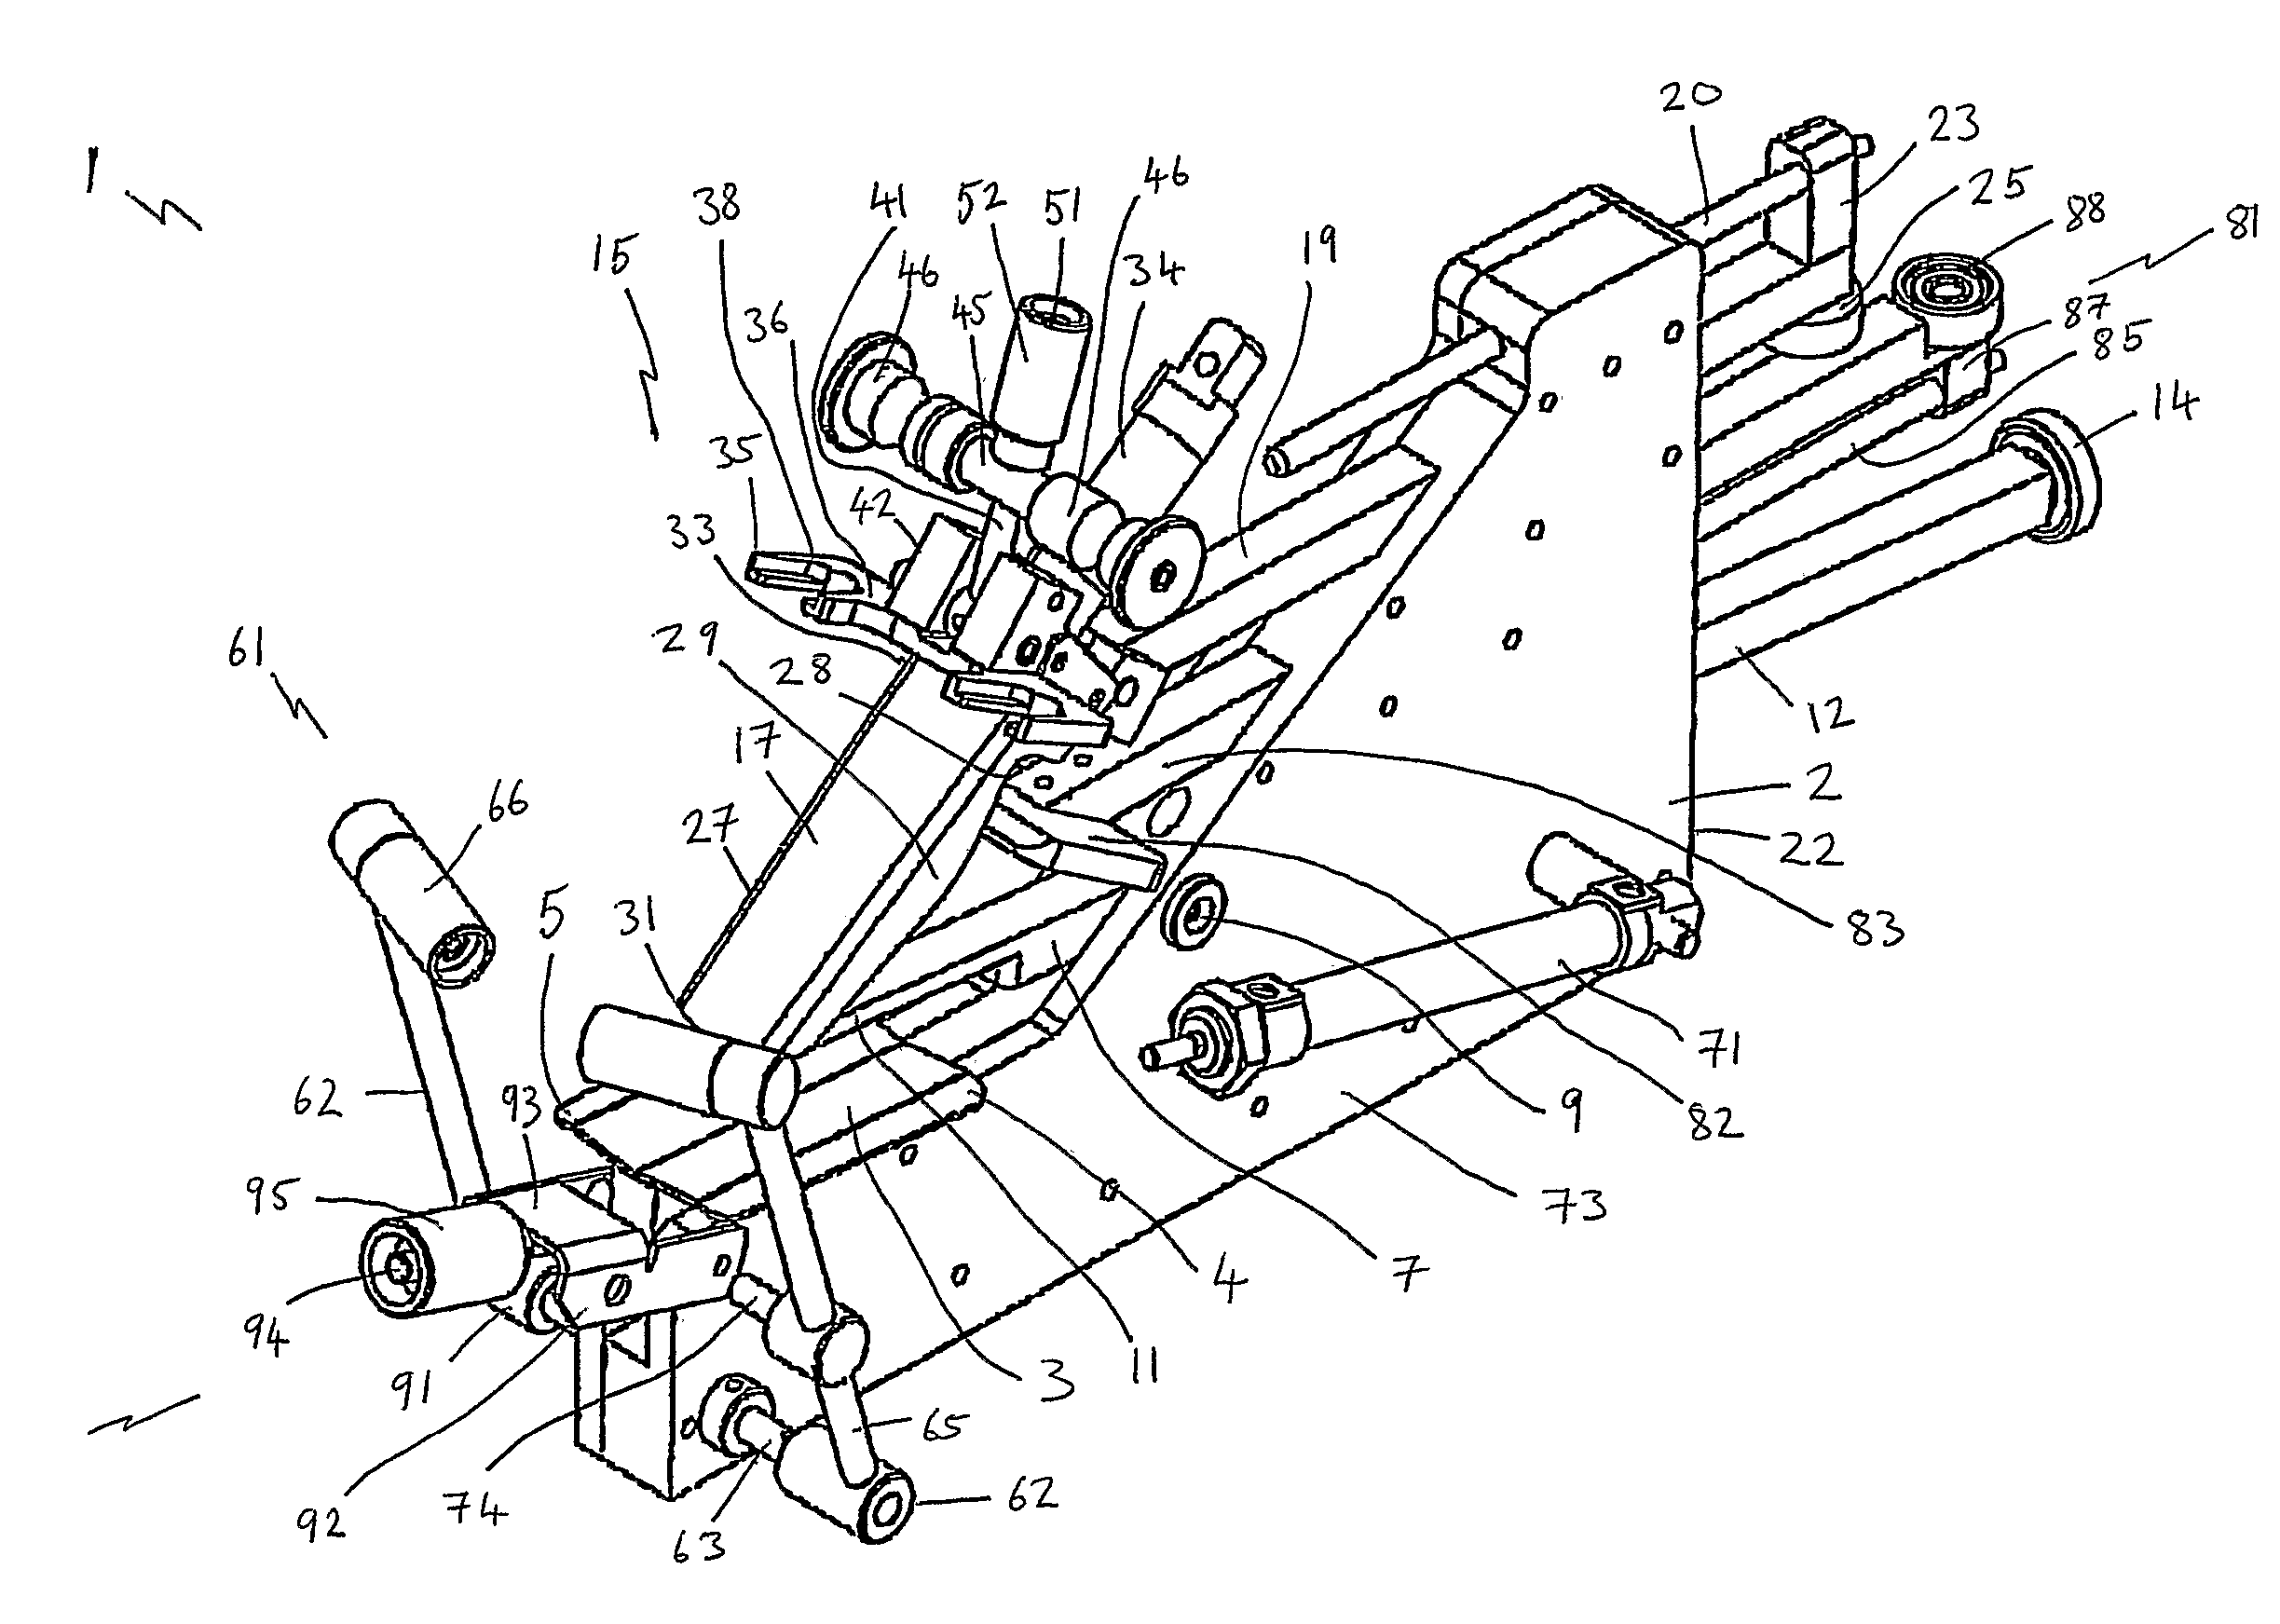 Apparatus for trussing a bird